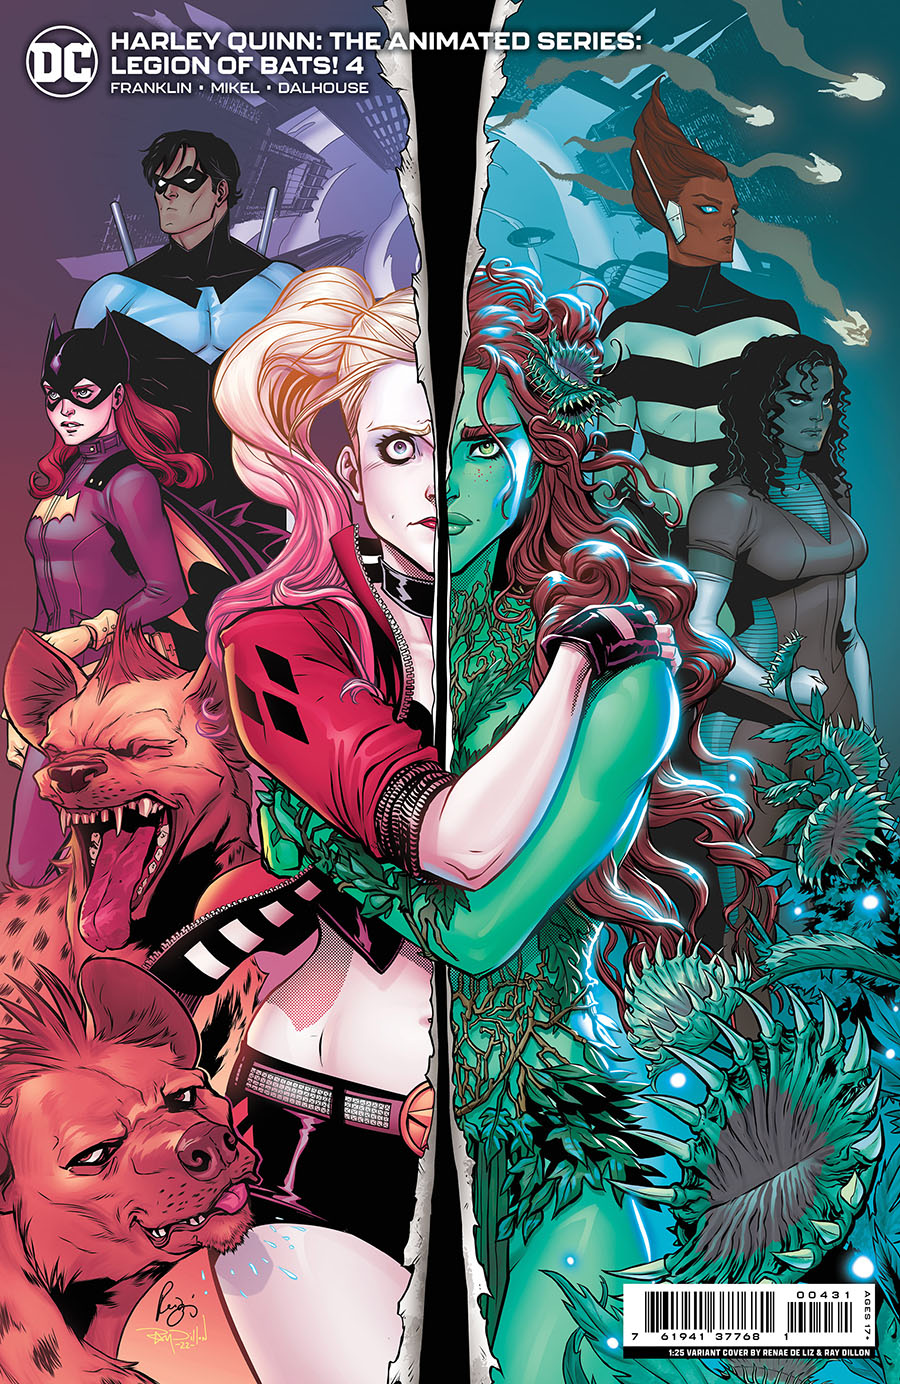 Harley Quinn The Animated Series Legion Of Bats #4 Cover C Incentive Renae De Liz Card Stock Variant Cover